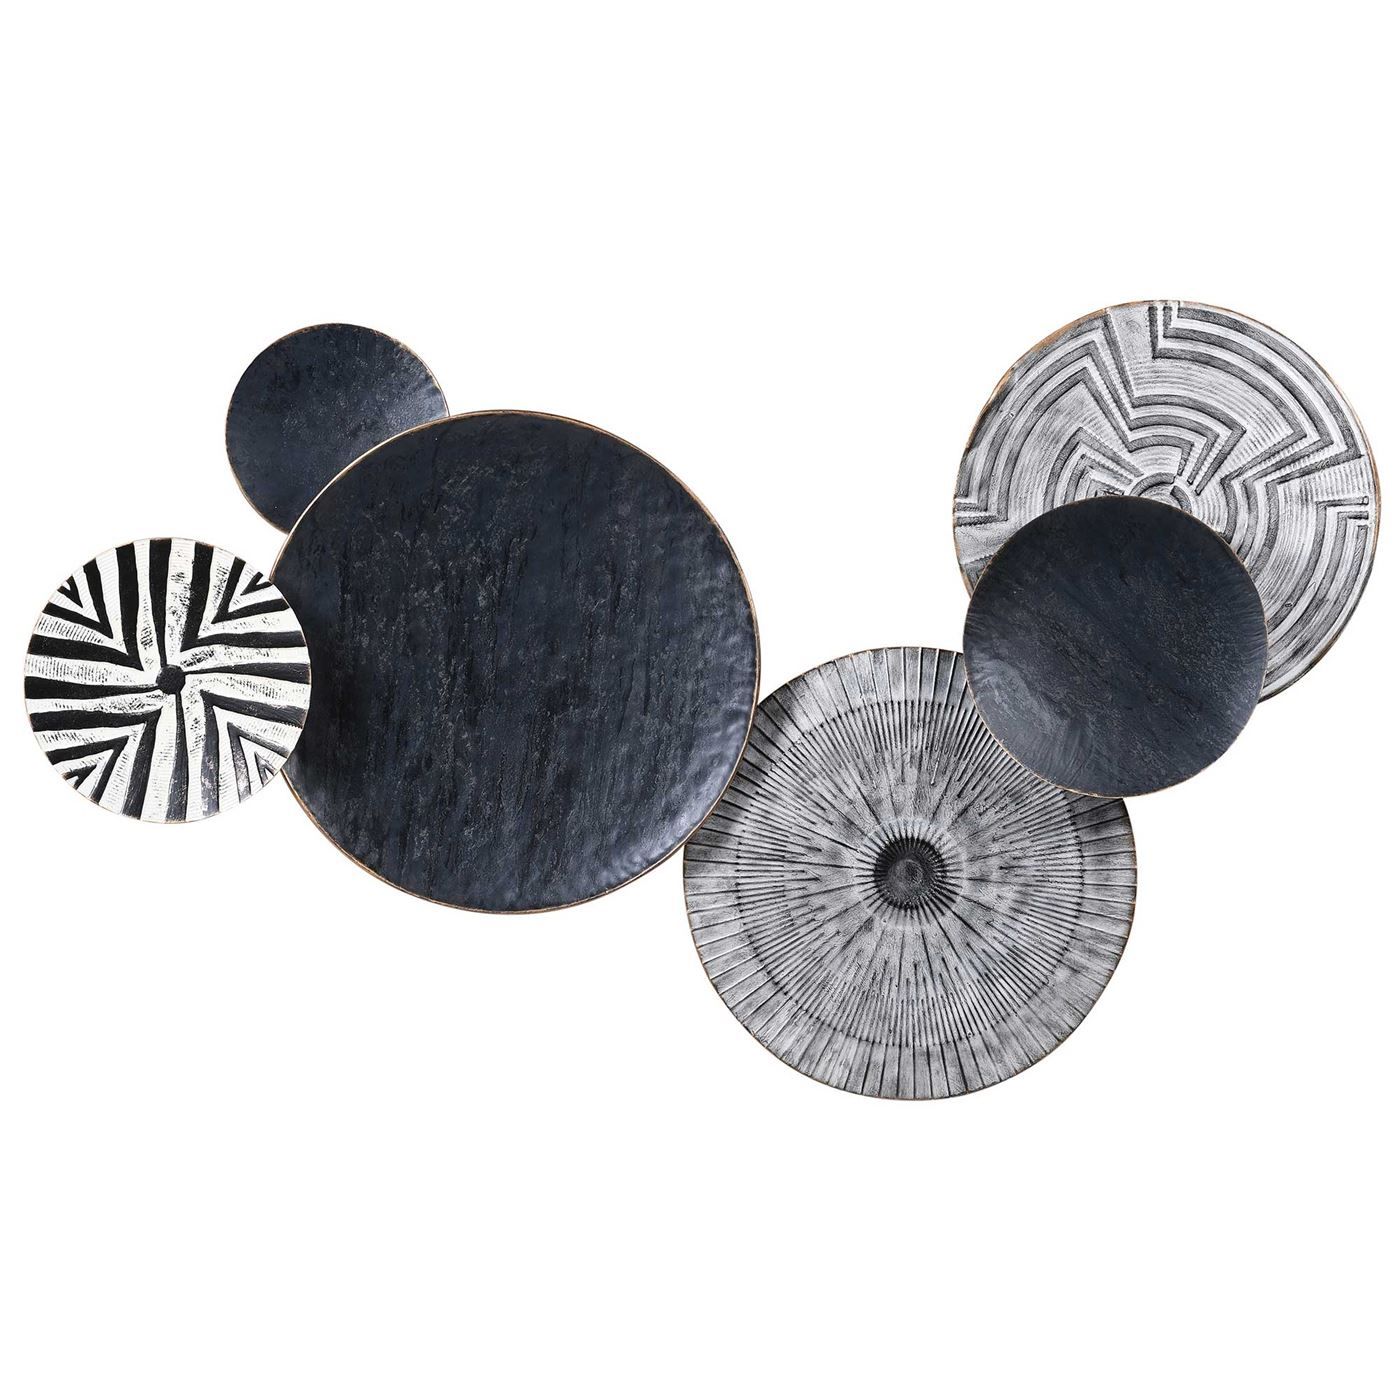 Decorative Circular Tribal Print Wall Art Black And White – Barker &  Stonehouse For Tribal Pattern Wall Art (View 13 of 15)